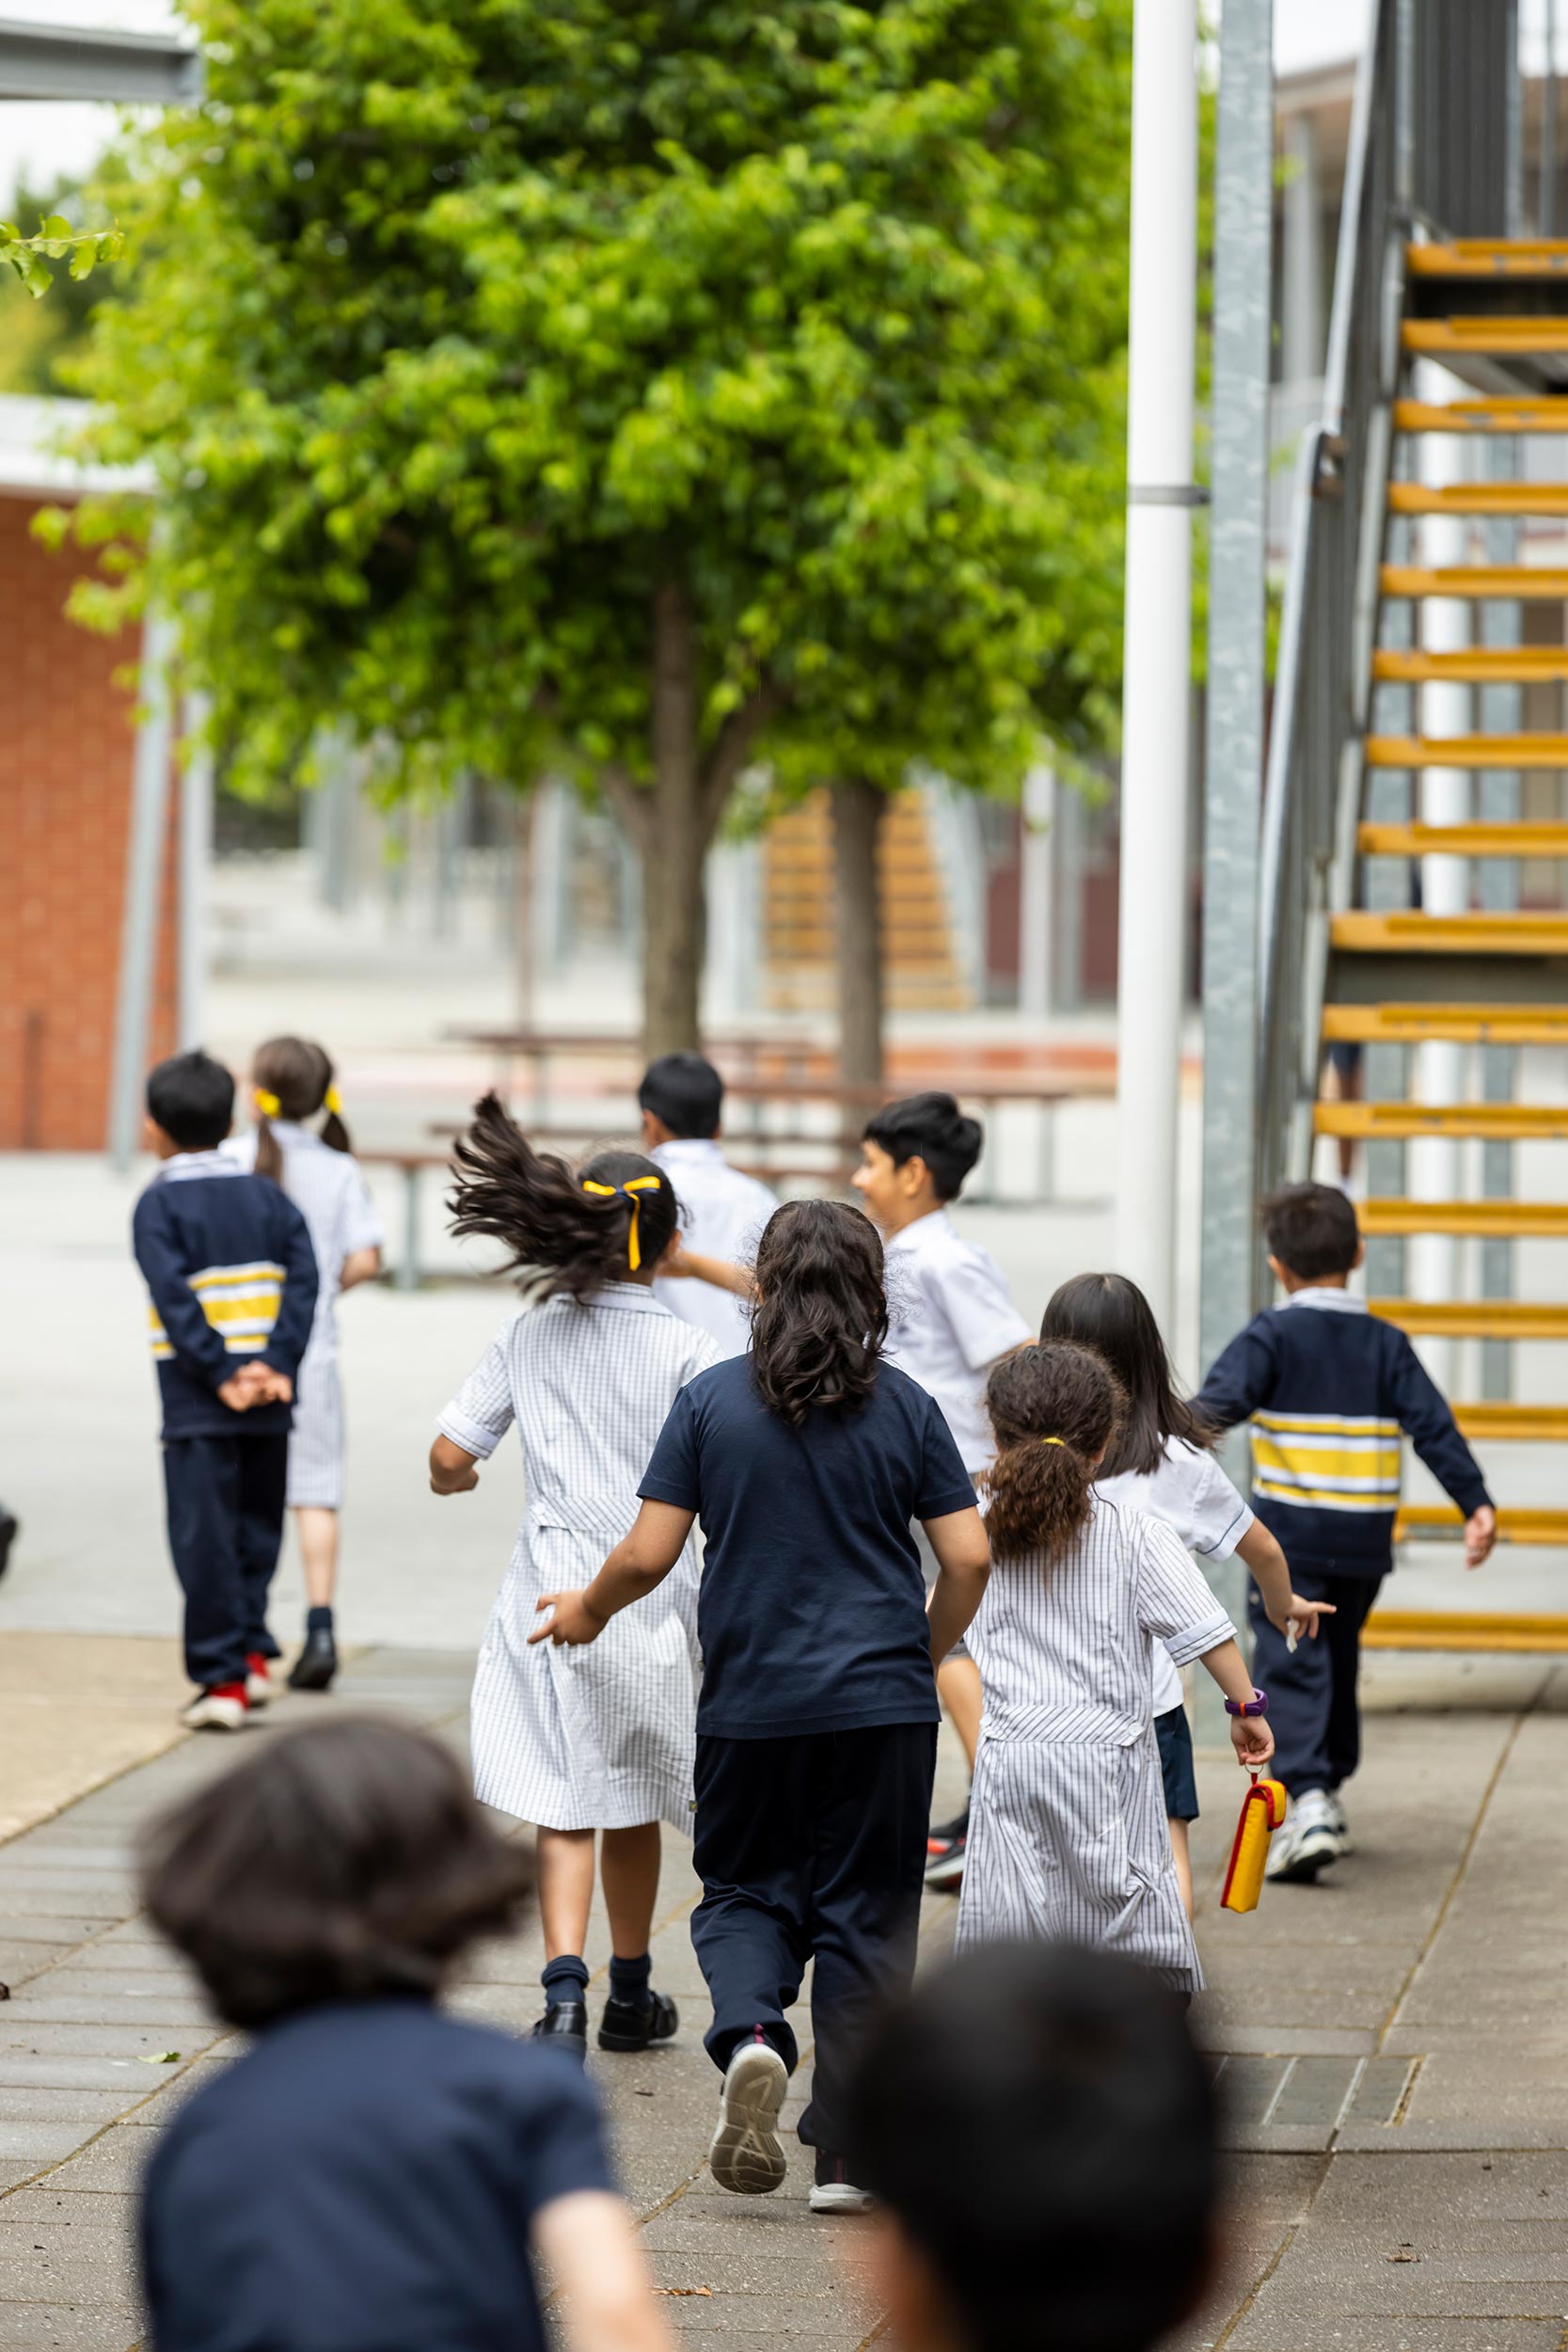 Primary school group of students walking together